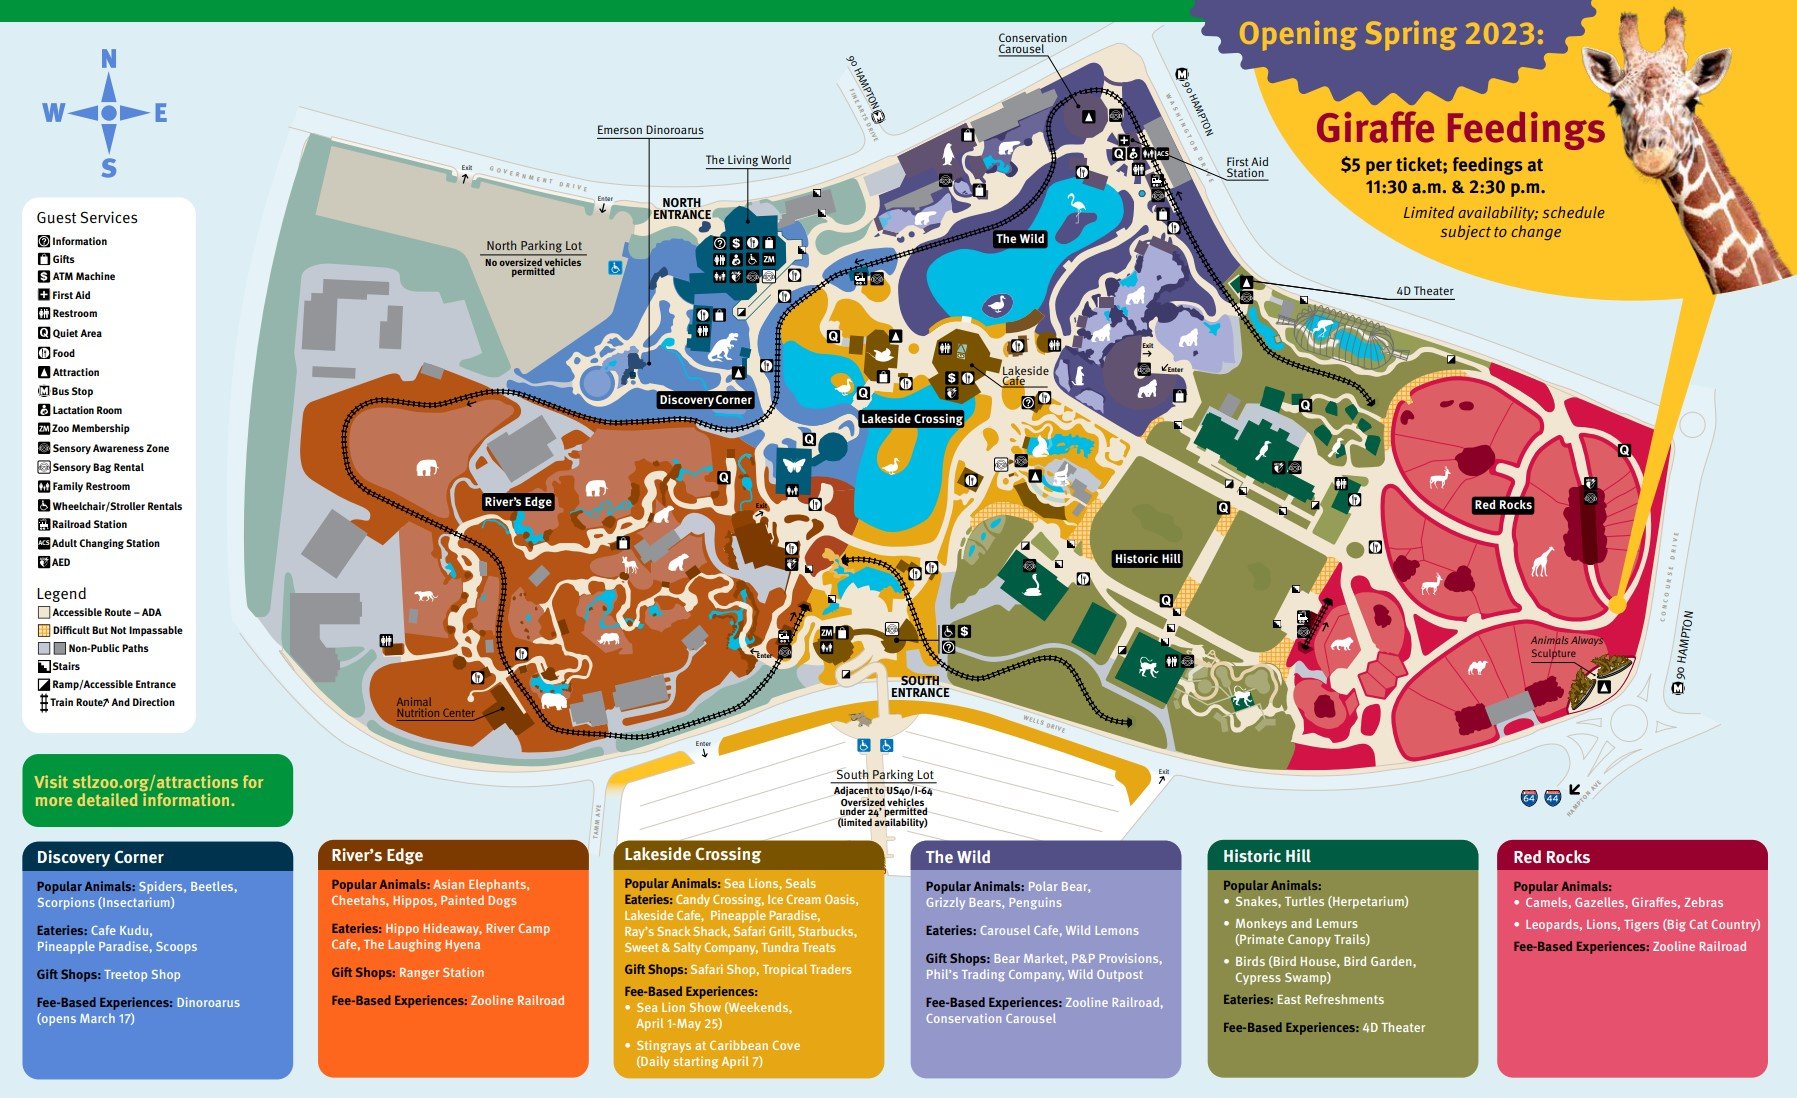  Zoo map from the stlzoo.org website 